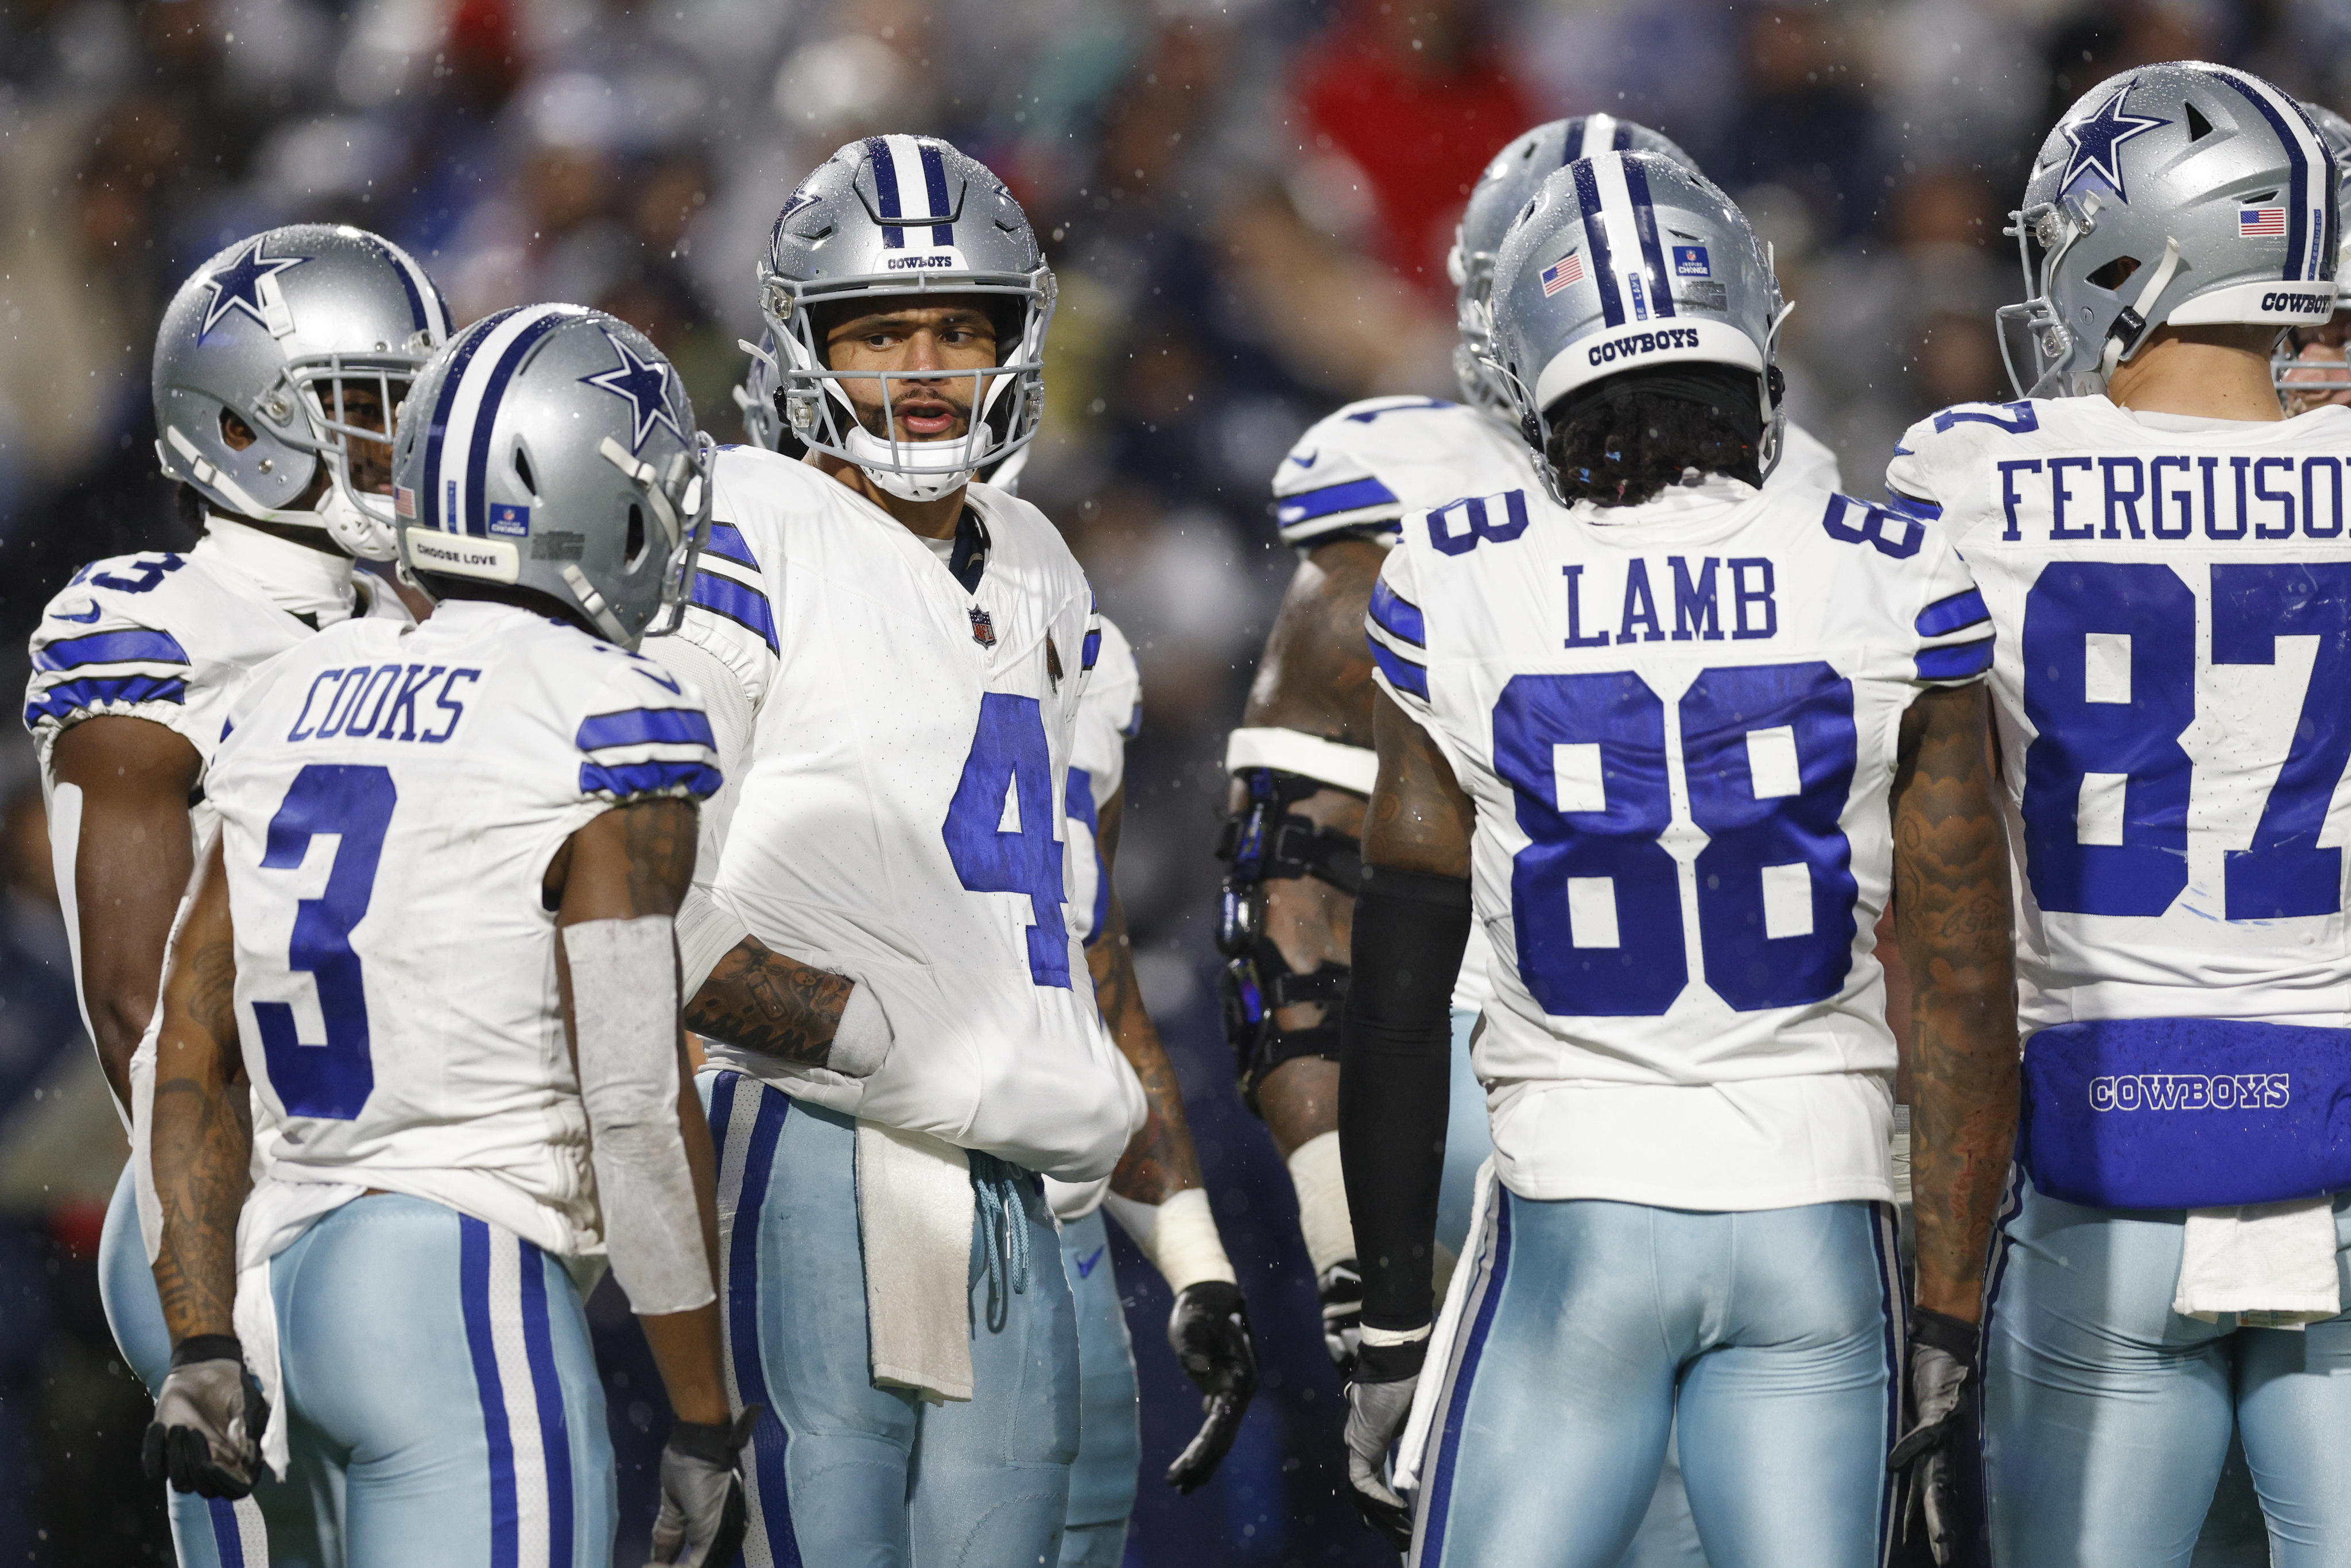 Cowboys-Dolphins early preview: With much on the line, can Dallas change road fortunes?